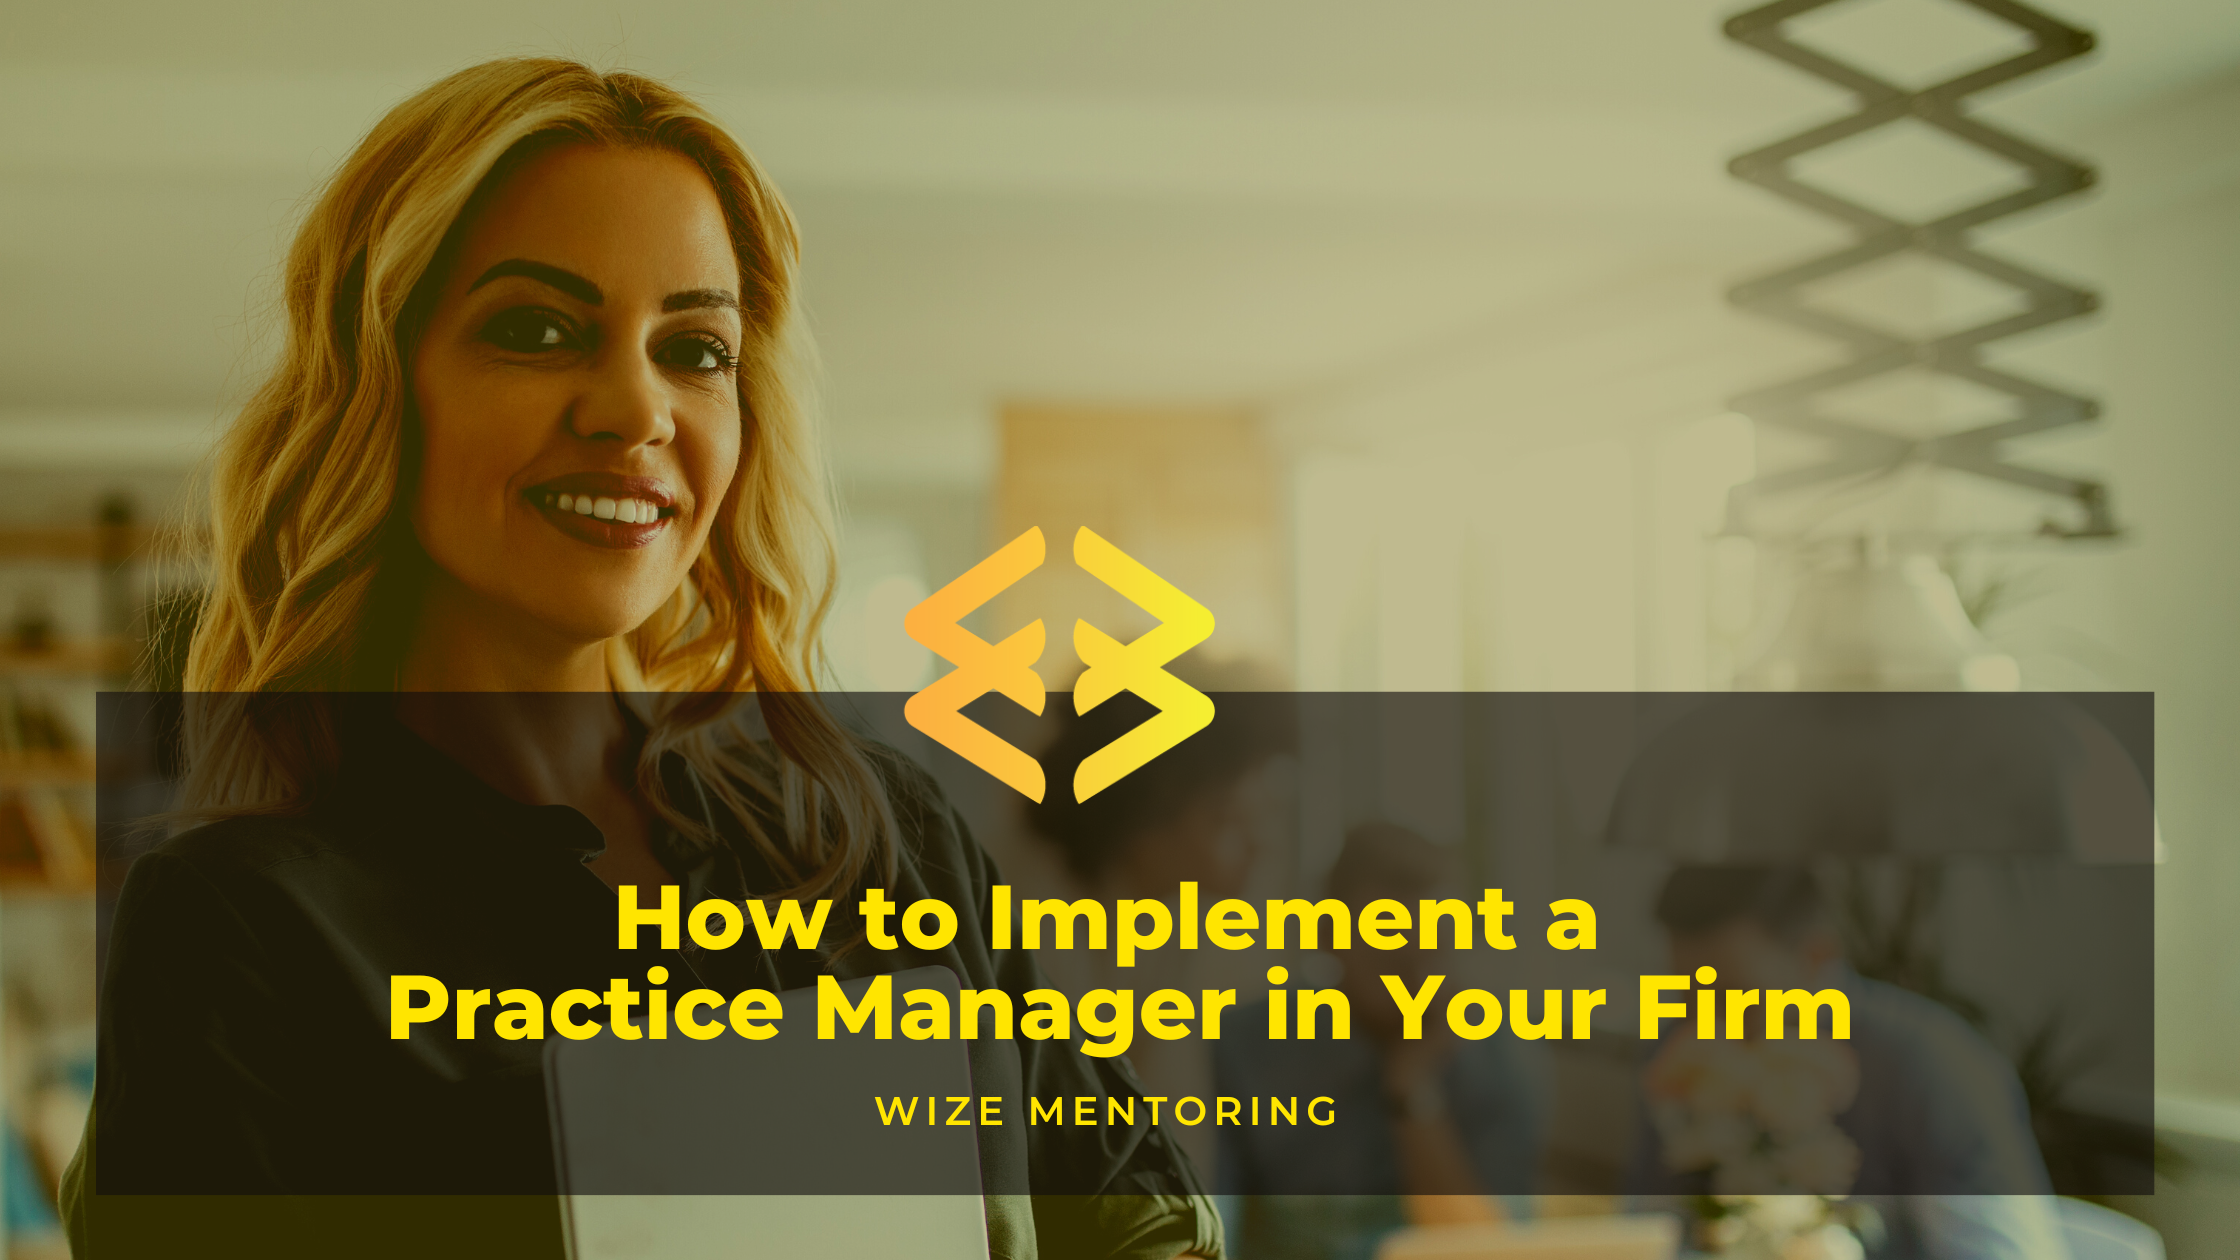 How to Implement a Practice Manager in Your Firm